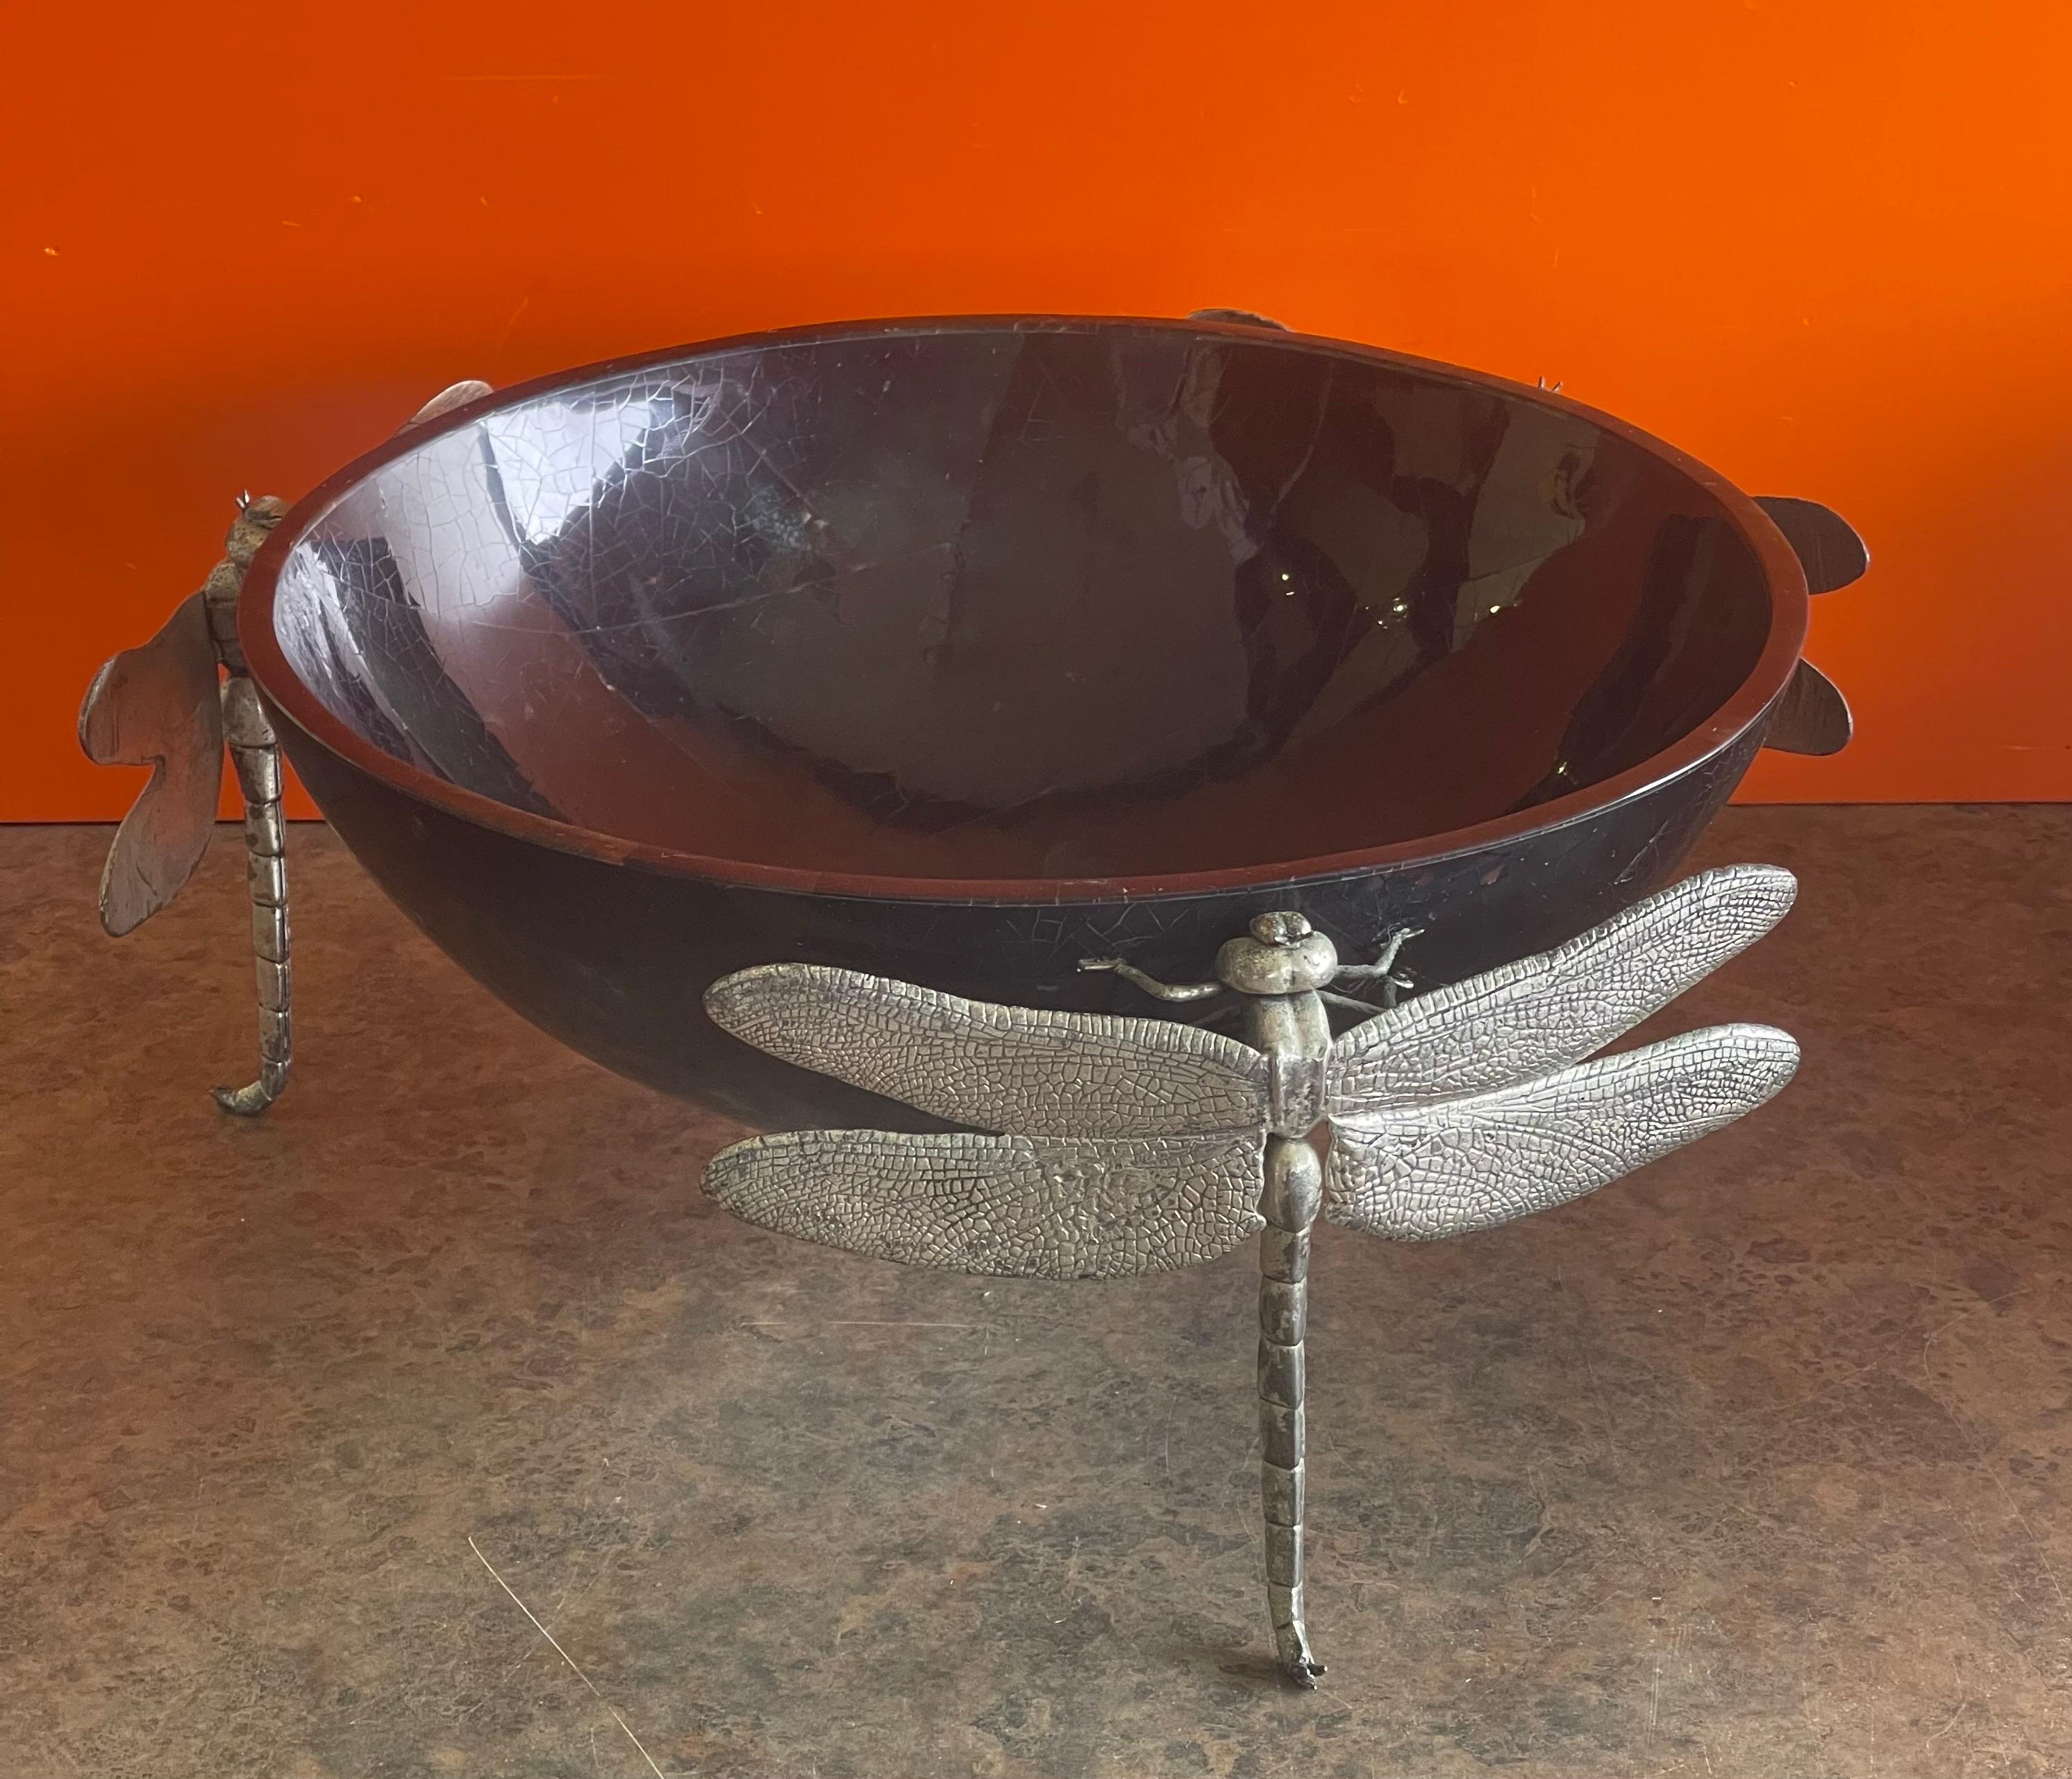 Gorgeous vintage black penshell centerpiece bowl with detailed dragonfly feet, circa 1990s. The dragonfly signifies transformation and adaptability. This beautiful handmade bowl is formed by creating a mosaic of black penshell, embellished with